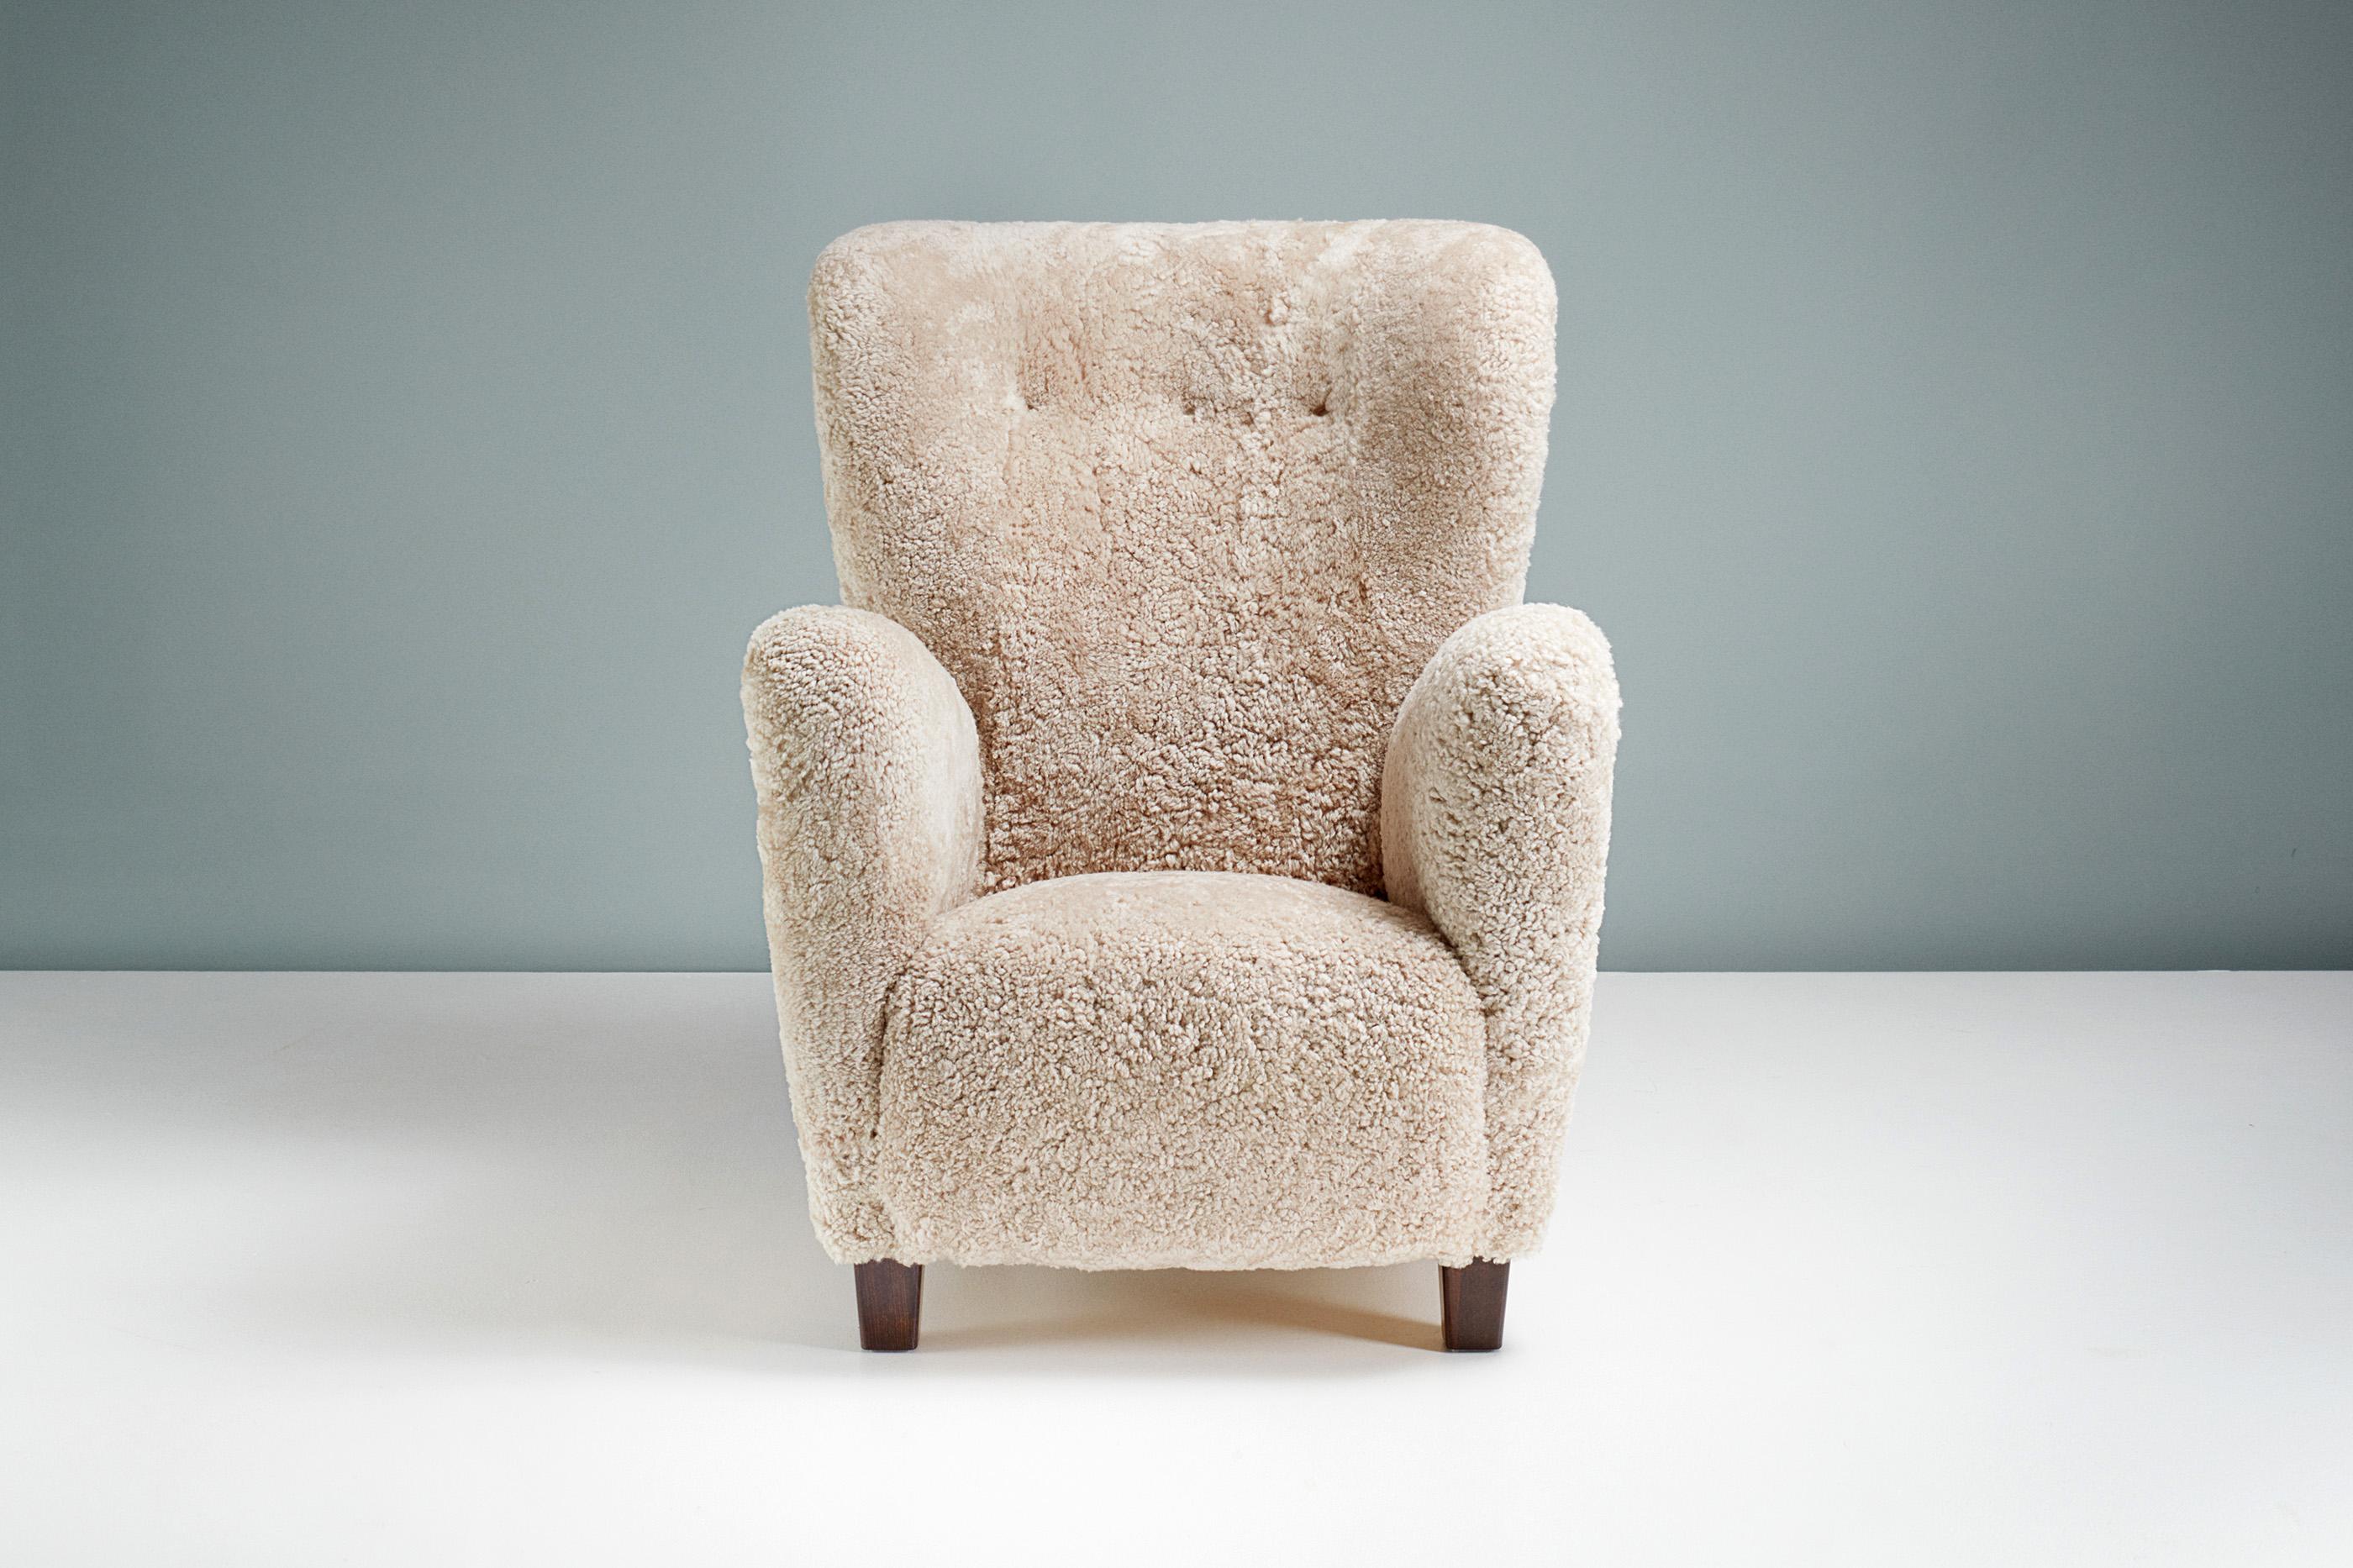 Danish Cabinetmaker Sheepskin Armchair, c1940s.

High back lounge chair produced by a Danish Cabinetmaker in the 1940s. It features a curved wing-back with stained beech legs. The chair has been totally refurbished at our London workshops with new